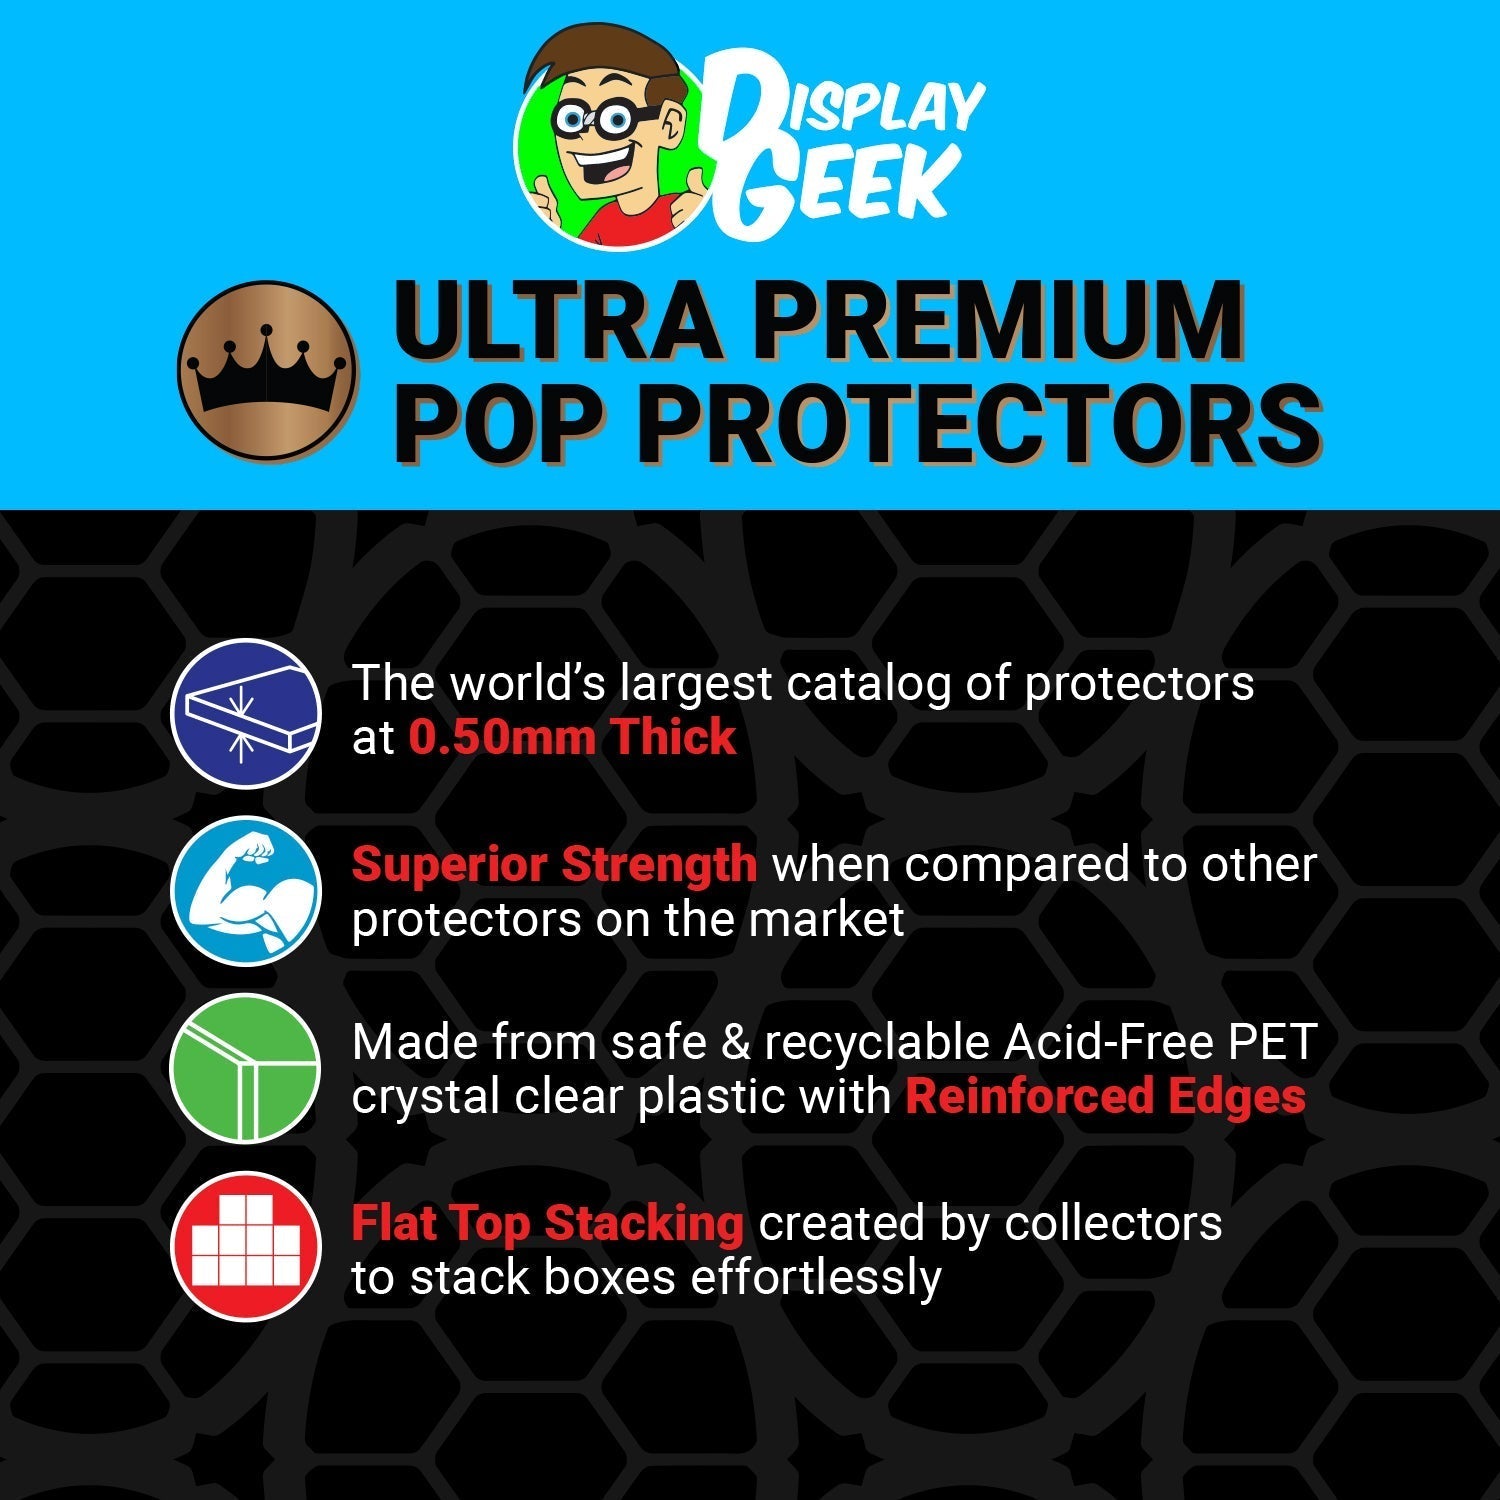 Pop Protector for 9 inch Giant Buzz Lightyear Metallic D23 Expo Funko Pop - PPG Pop Protector Guide Search Created by Display Geek